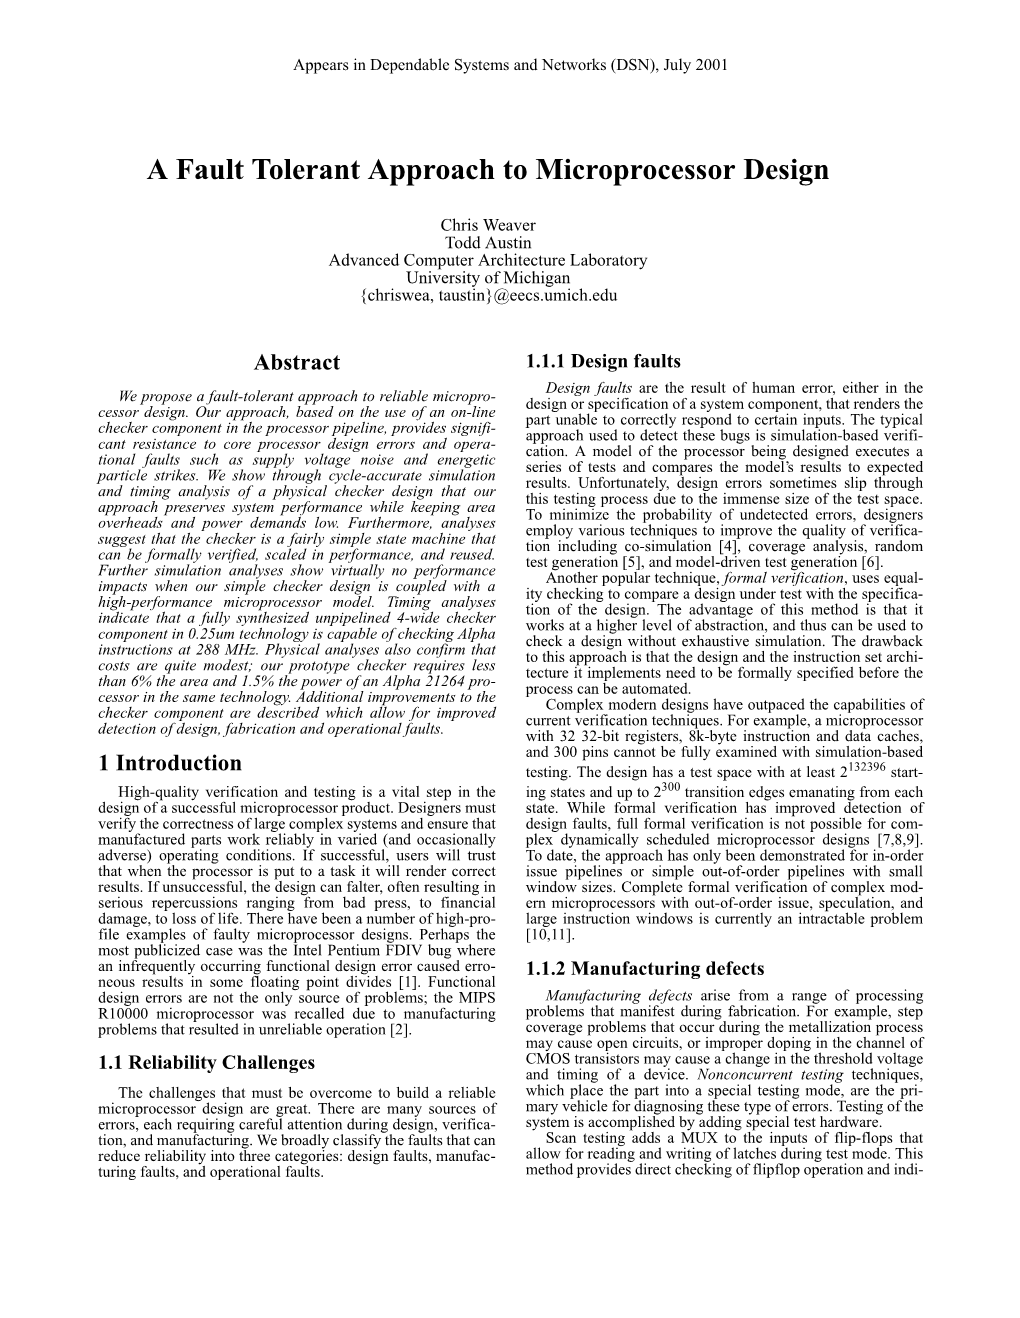 A Fault Tolerant Approach to Microprocessor Design